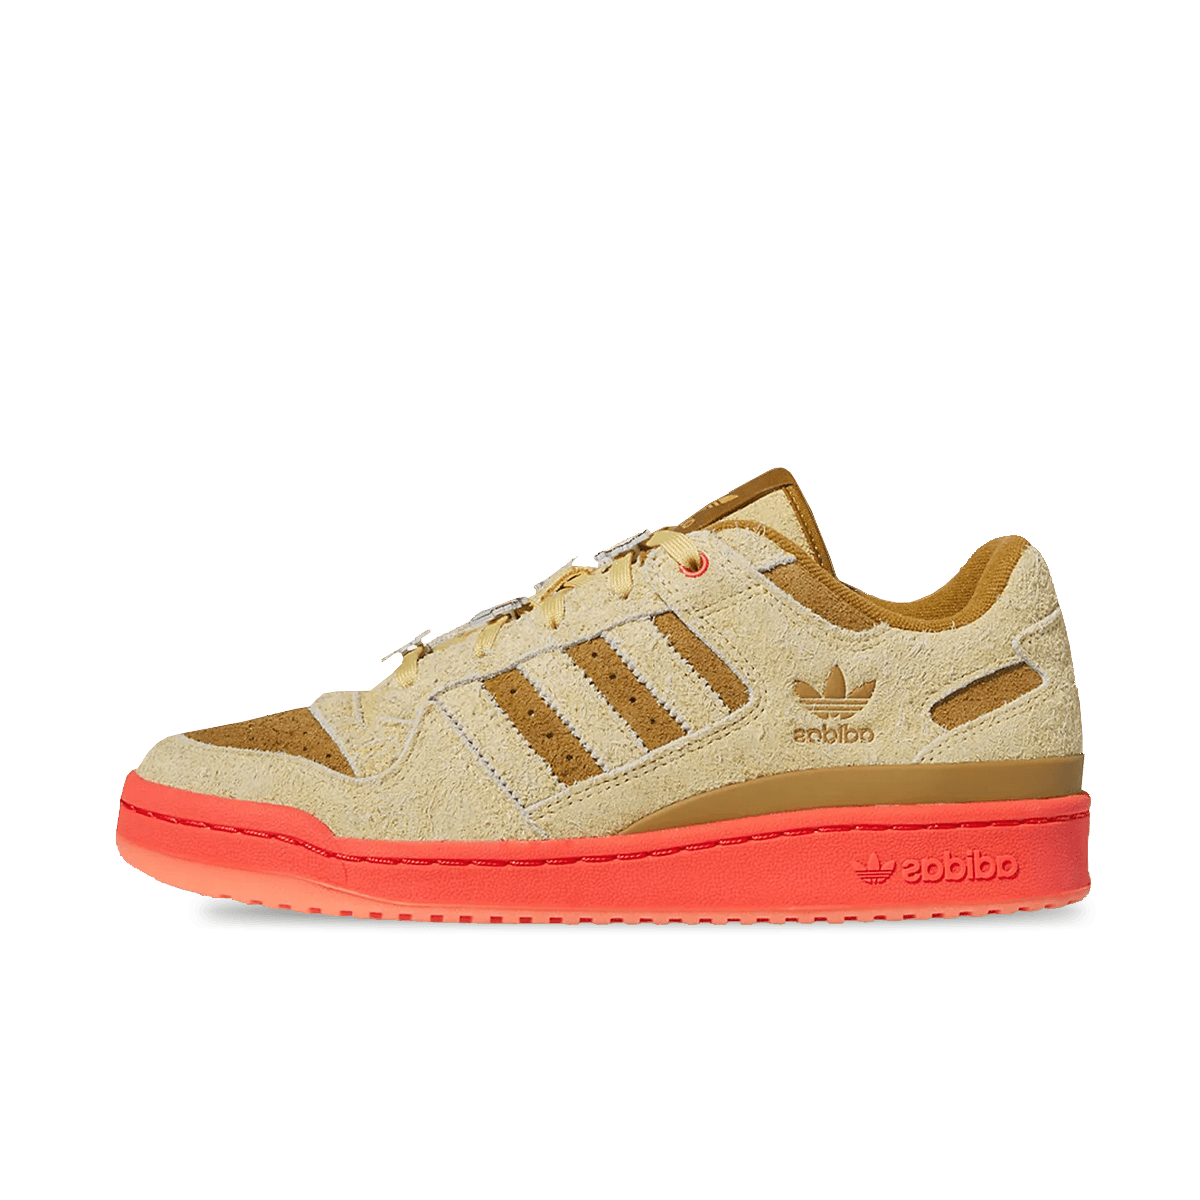 The Grinch x adidas Forum Low 'Brown' ID8896